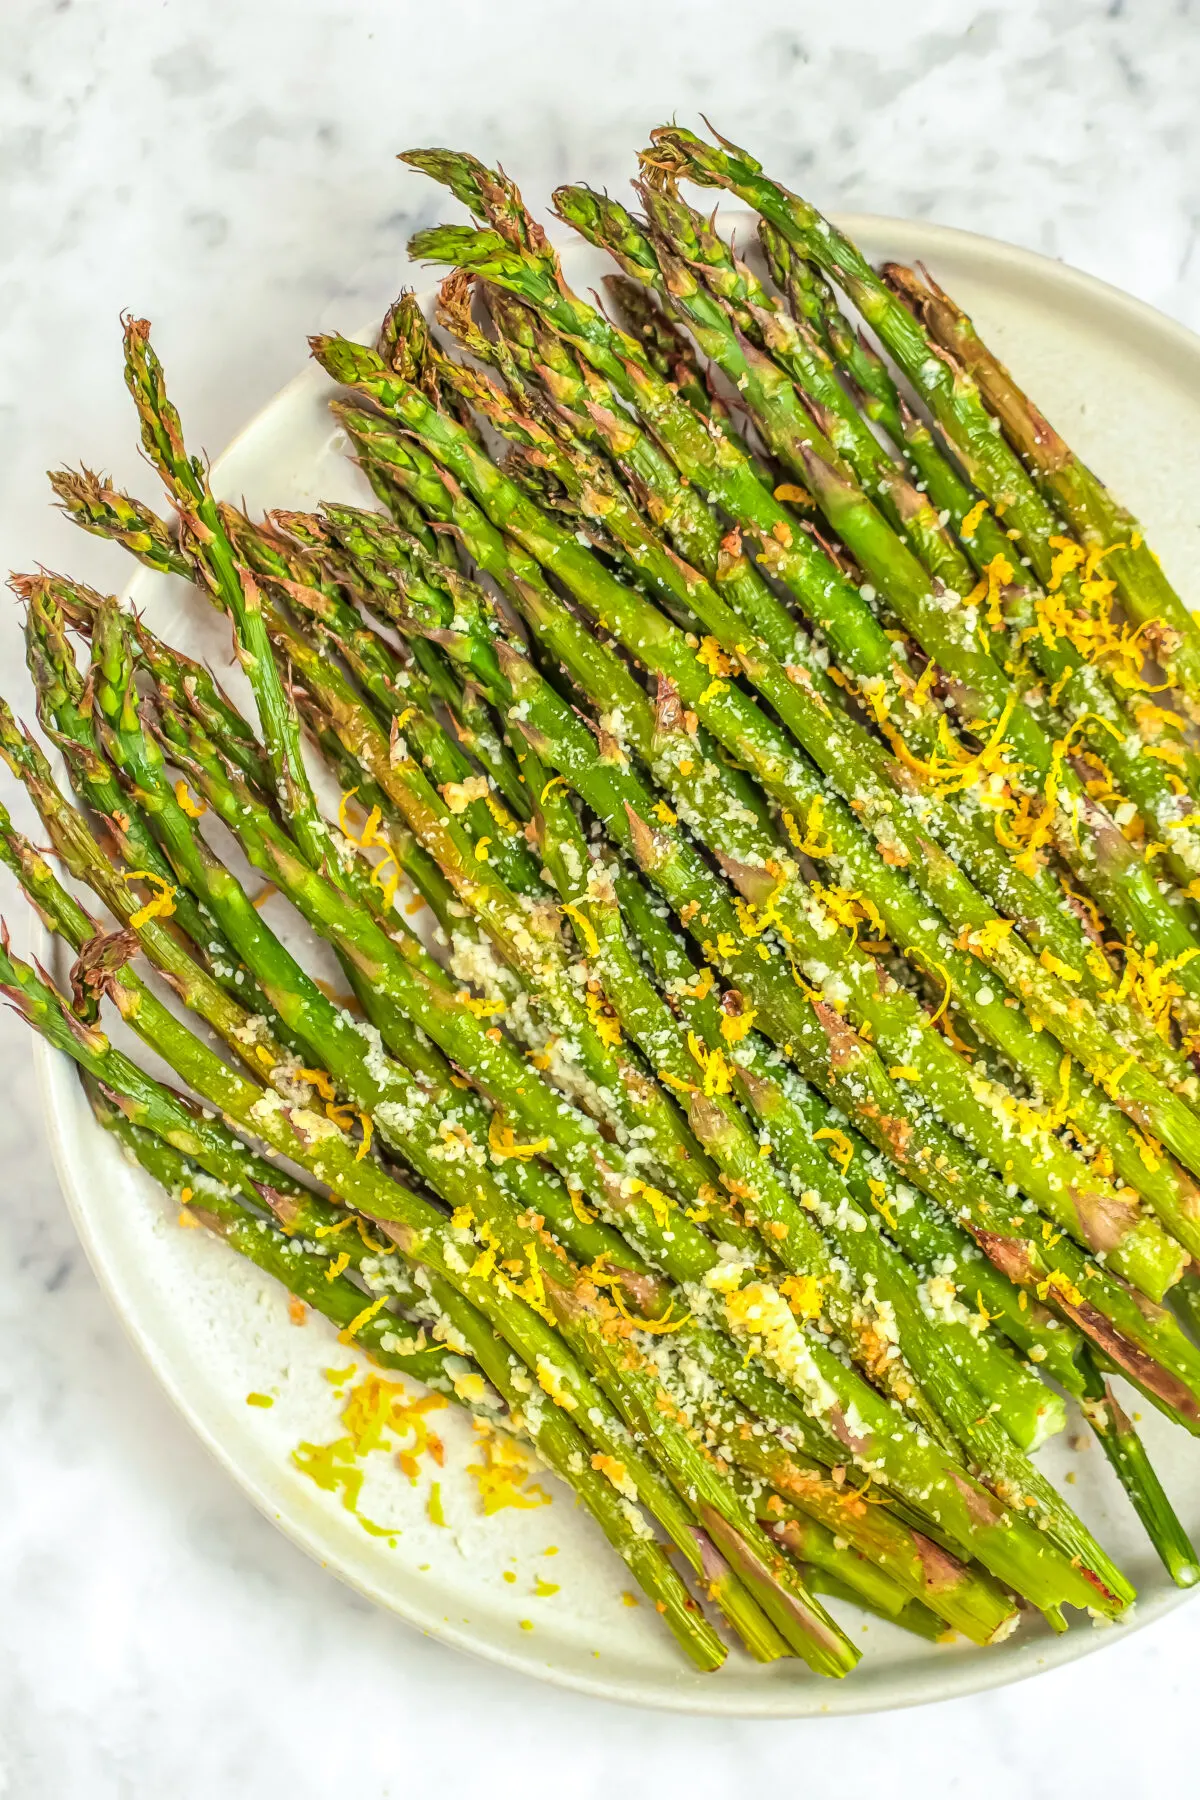 Looking for a delicious way to enjoy asparagus? Our air fryer roasted asparagus recipe is simple, healthy, and absolutely the best side dish!